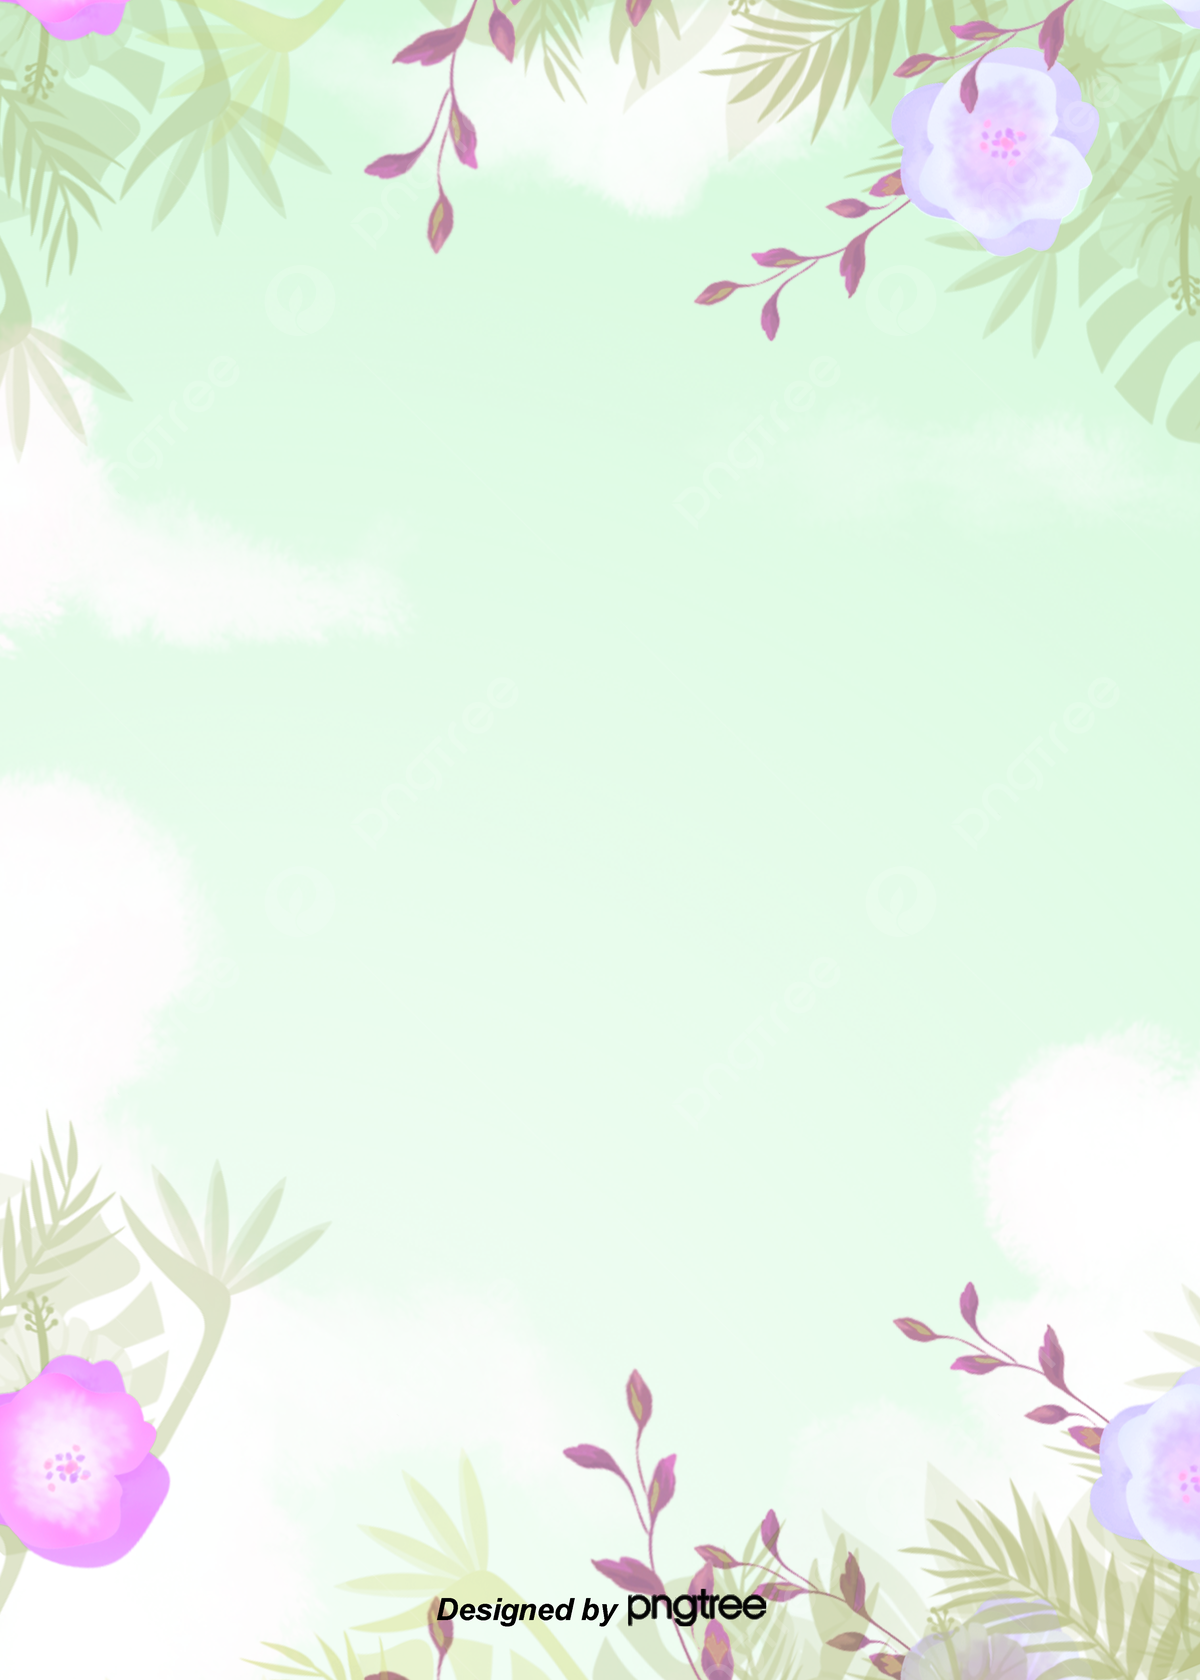 Green Aesthetic Spring Watercolor Cartoon Illustration Background Wallpaper Image For Free Download